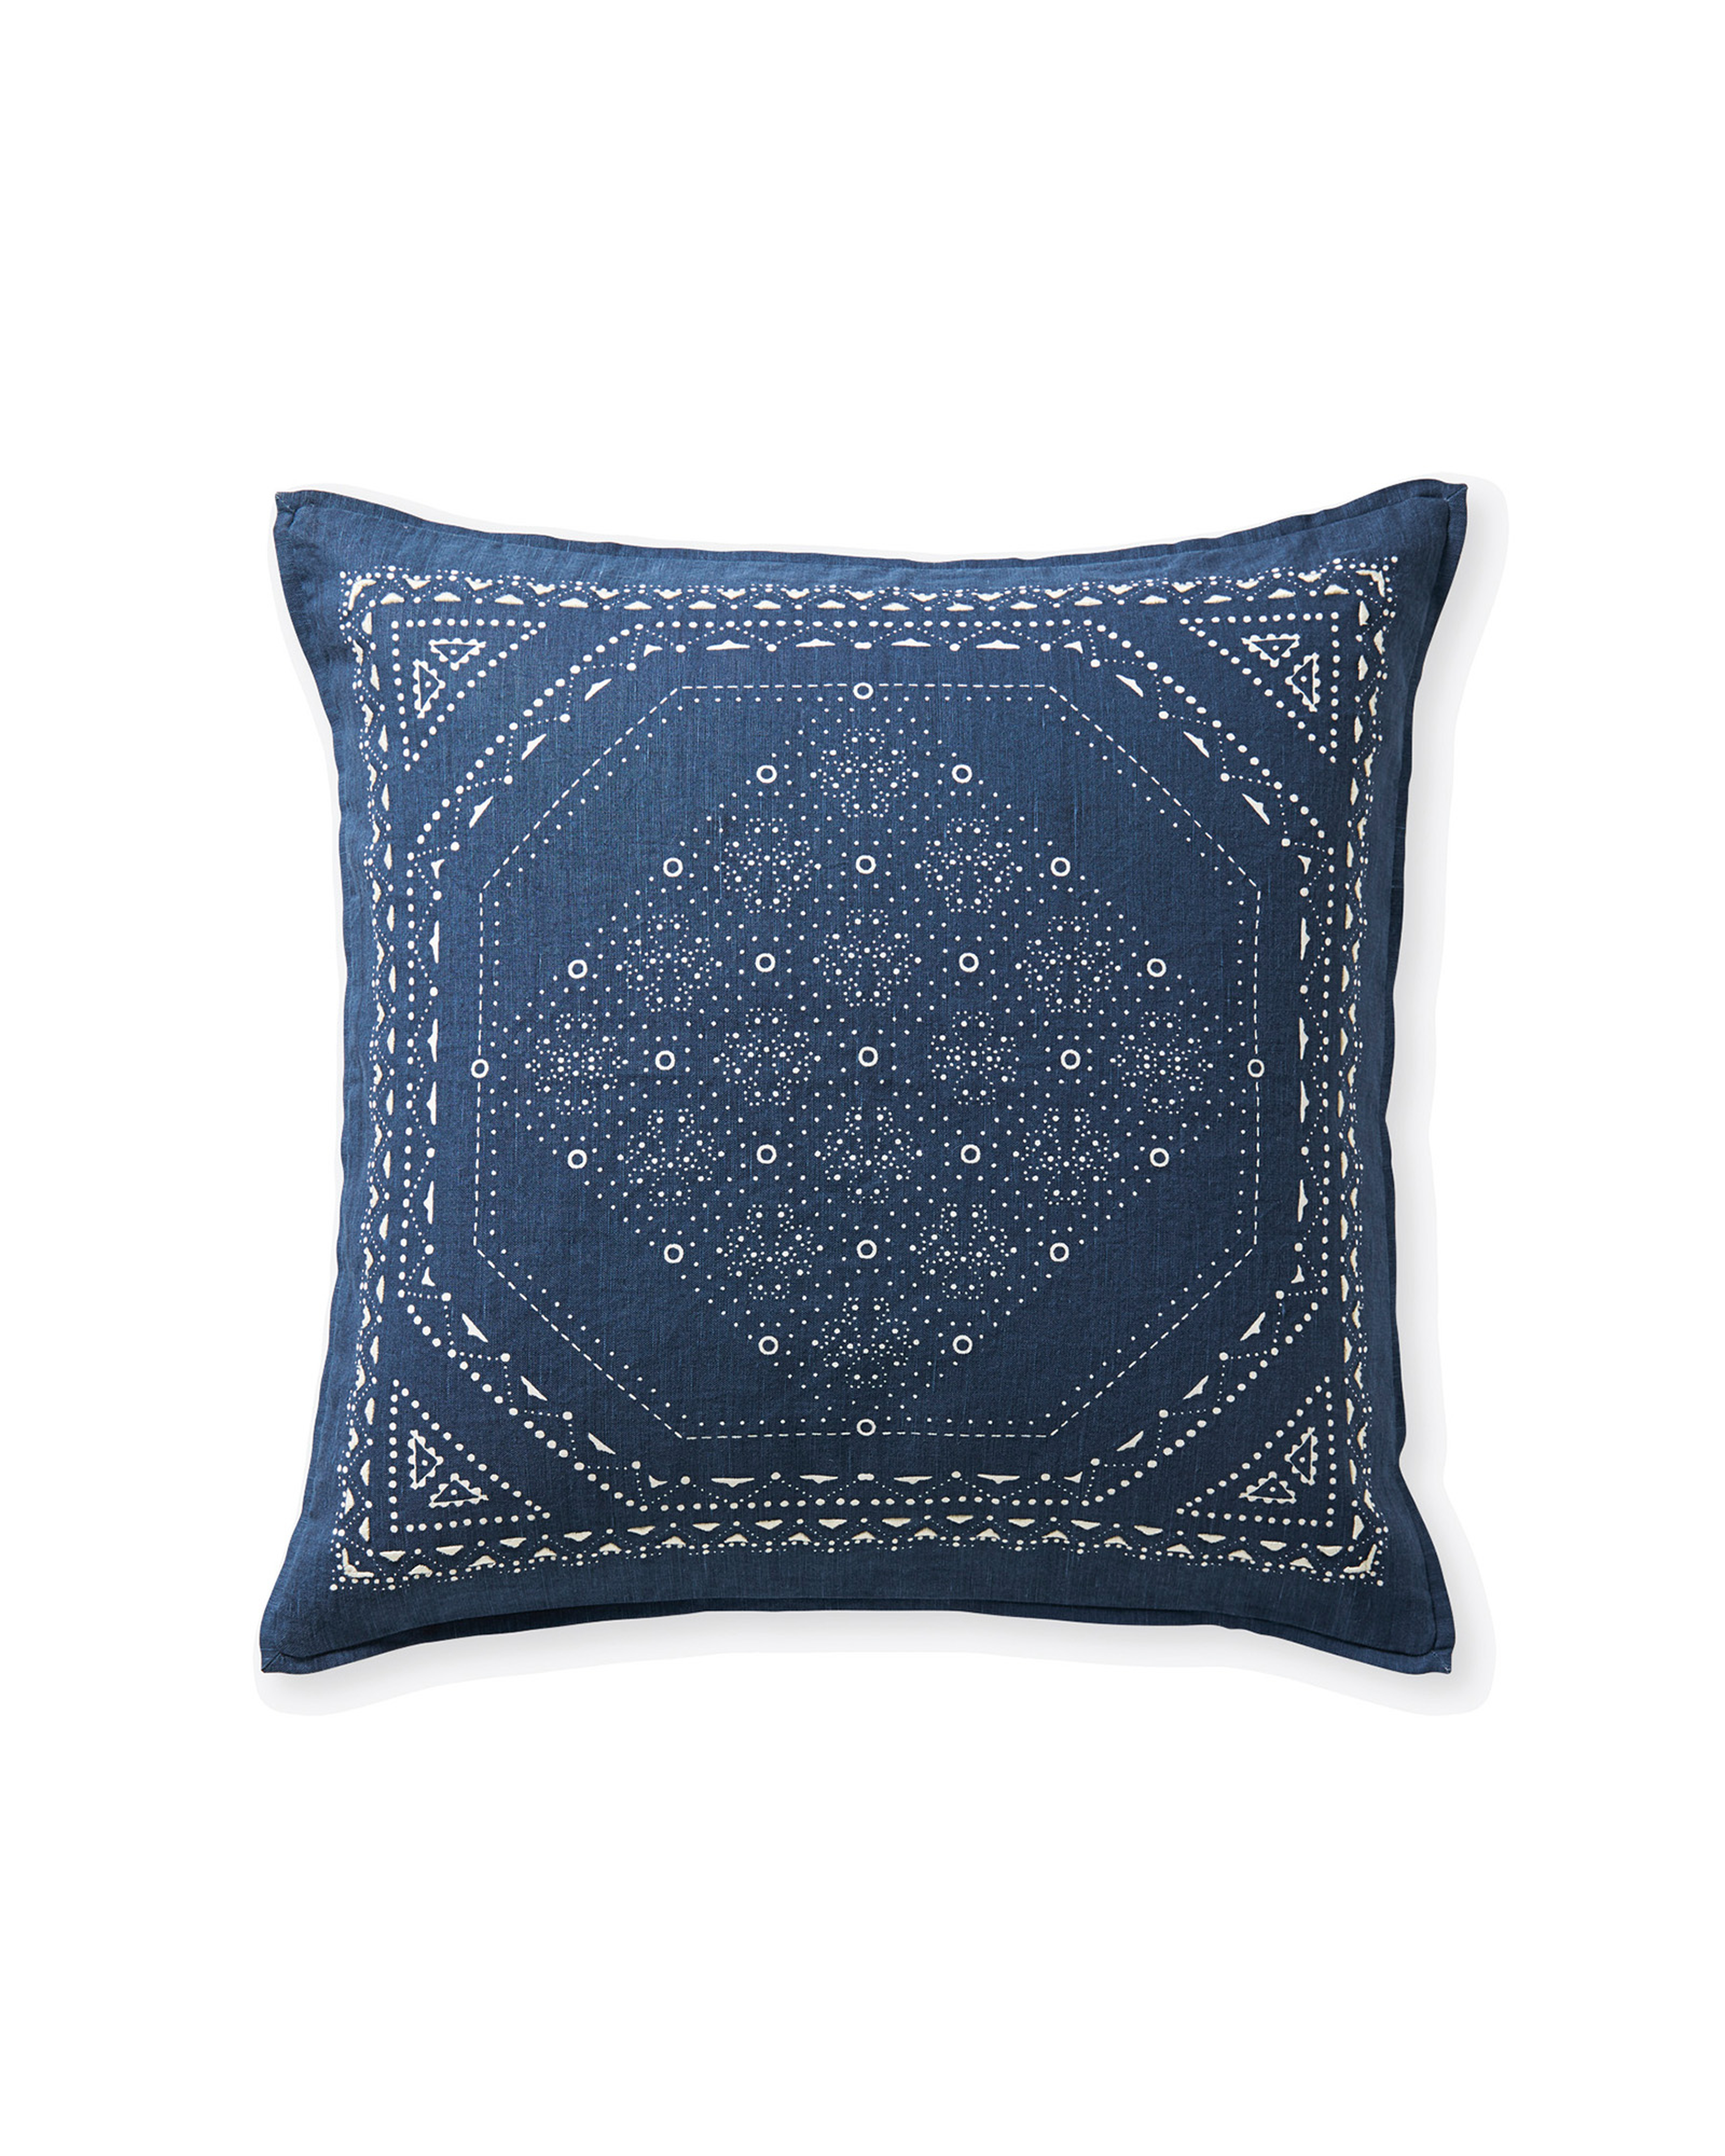 NEW Oakdale Pillow Cover - Serena and Lily